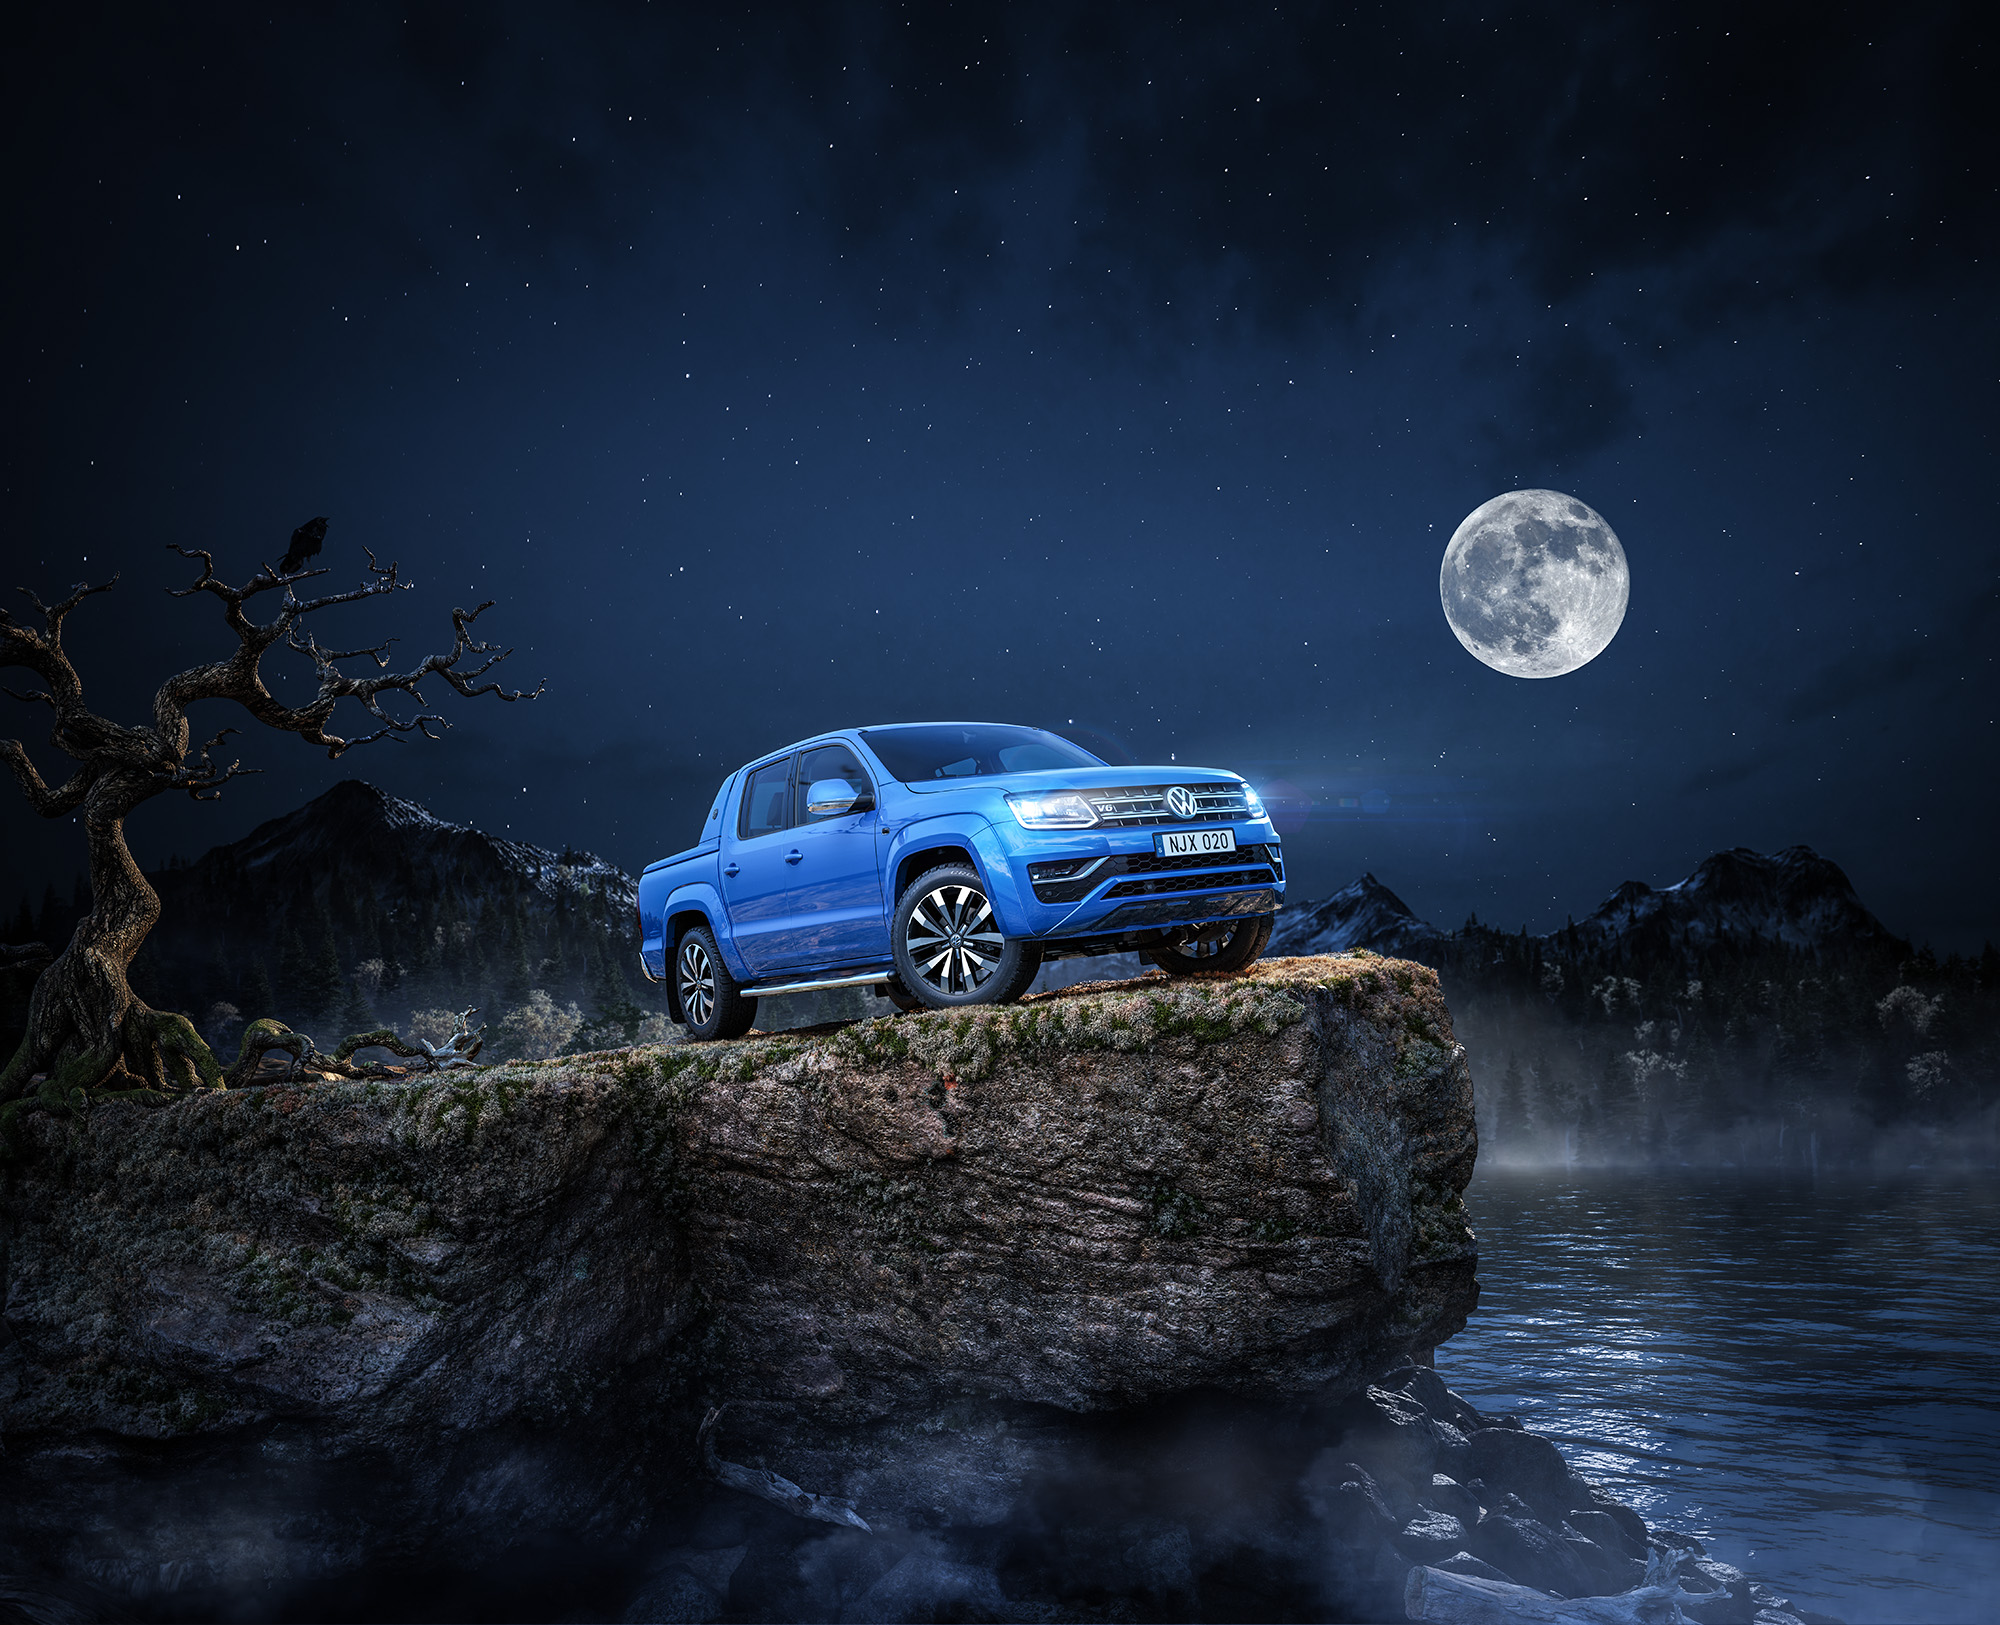 Volkswagen Amarok 2016 vampire full moon night version on a rock in the middle of the lake